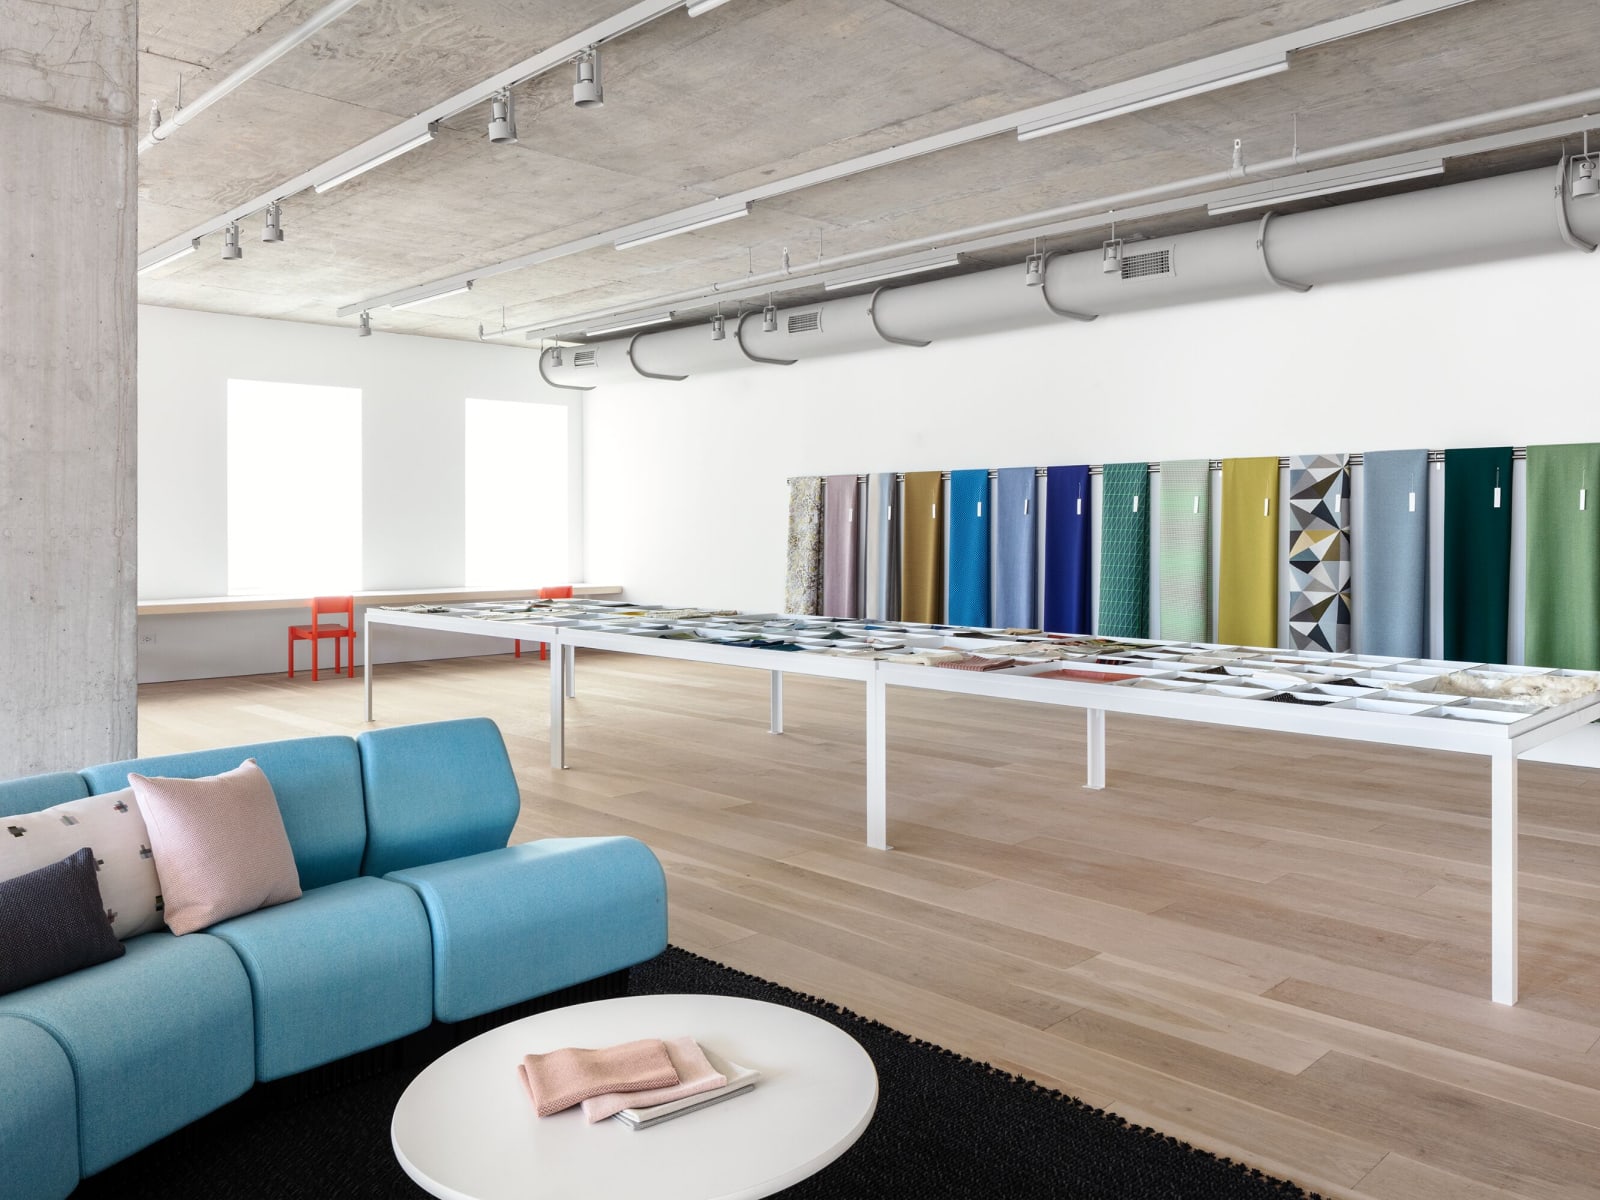 The Maharam Showroom at Fulton Market featuring a wall of colorful textiles, a white table covered with fabric swatches, and a blue Chadwick Sofa.